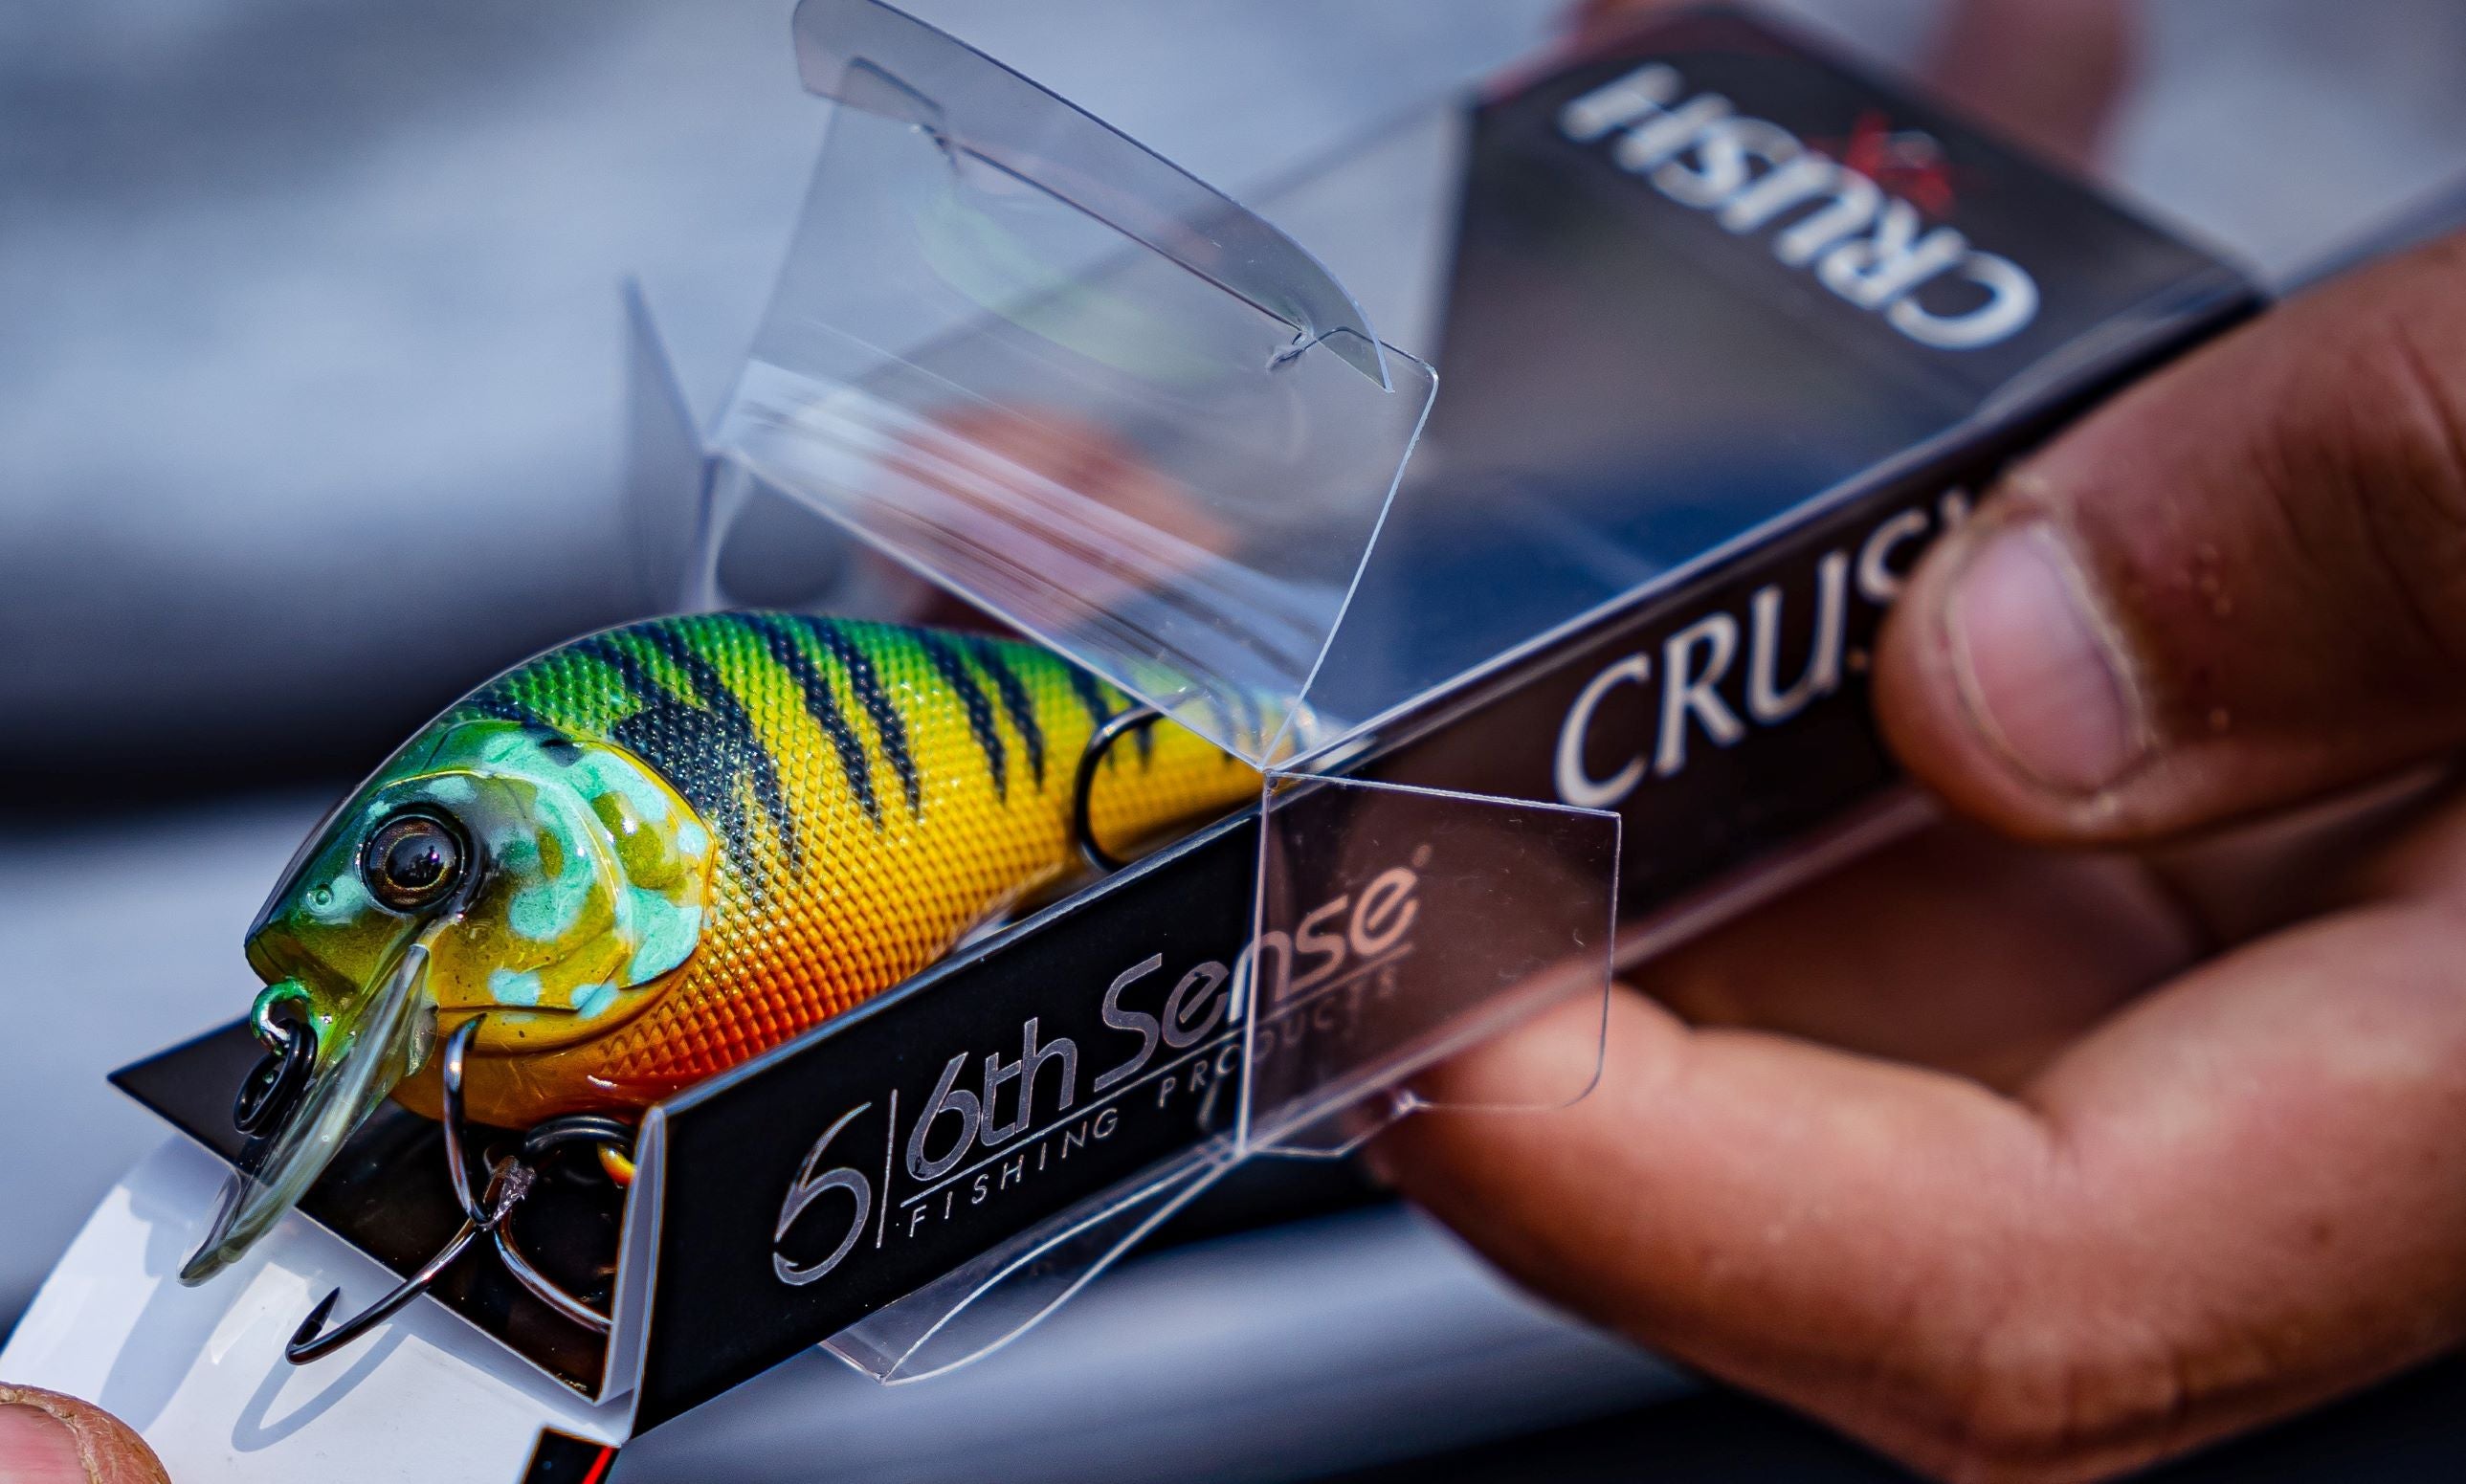 Sunrise Angler Hard baits | Crankbaits | Shallow Square Bill | Deep Diver |  Lipless Fishing Lures for Bass, Trout Freshwater and Saltwater